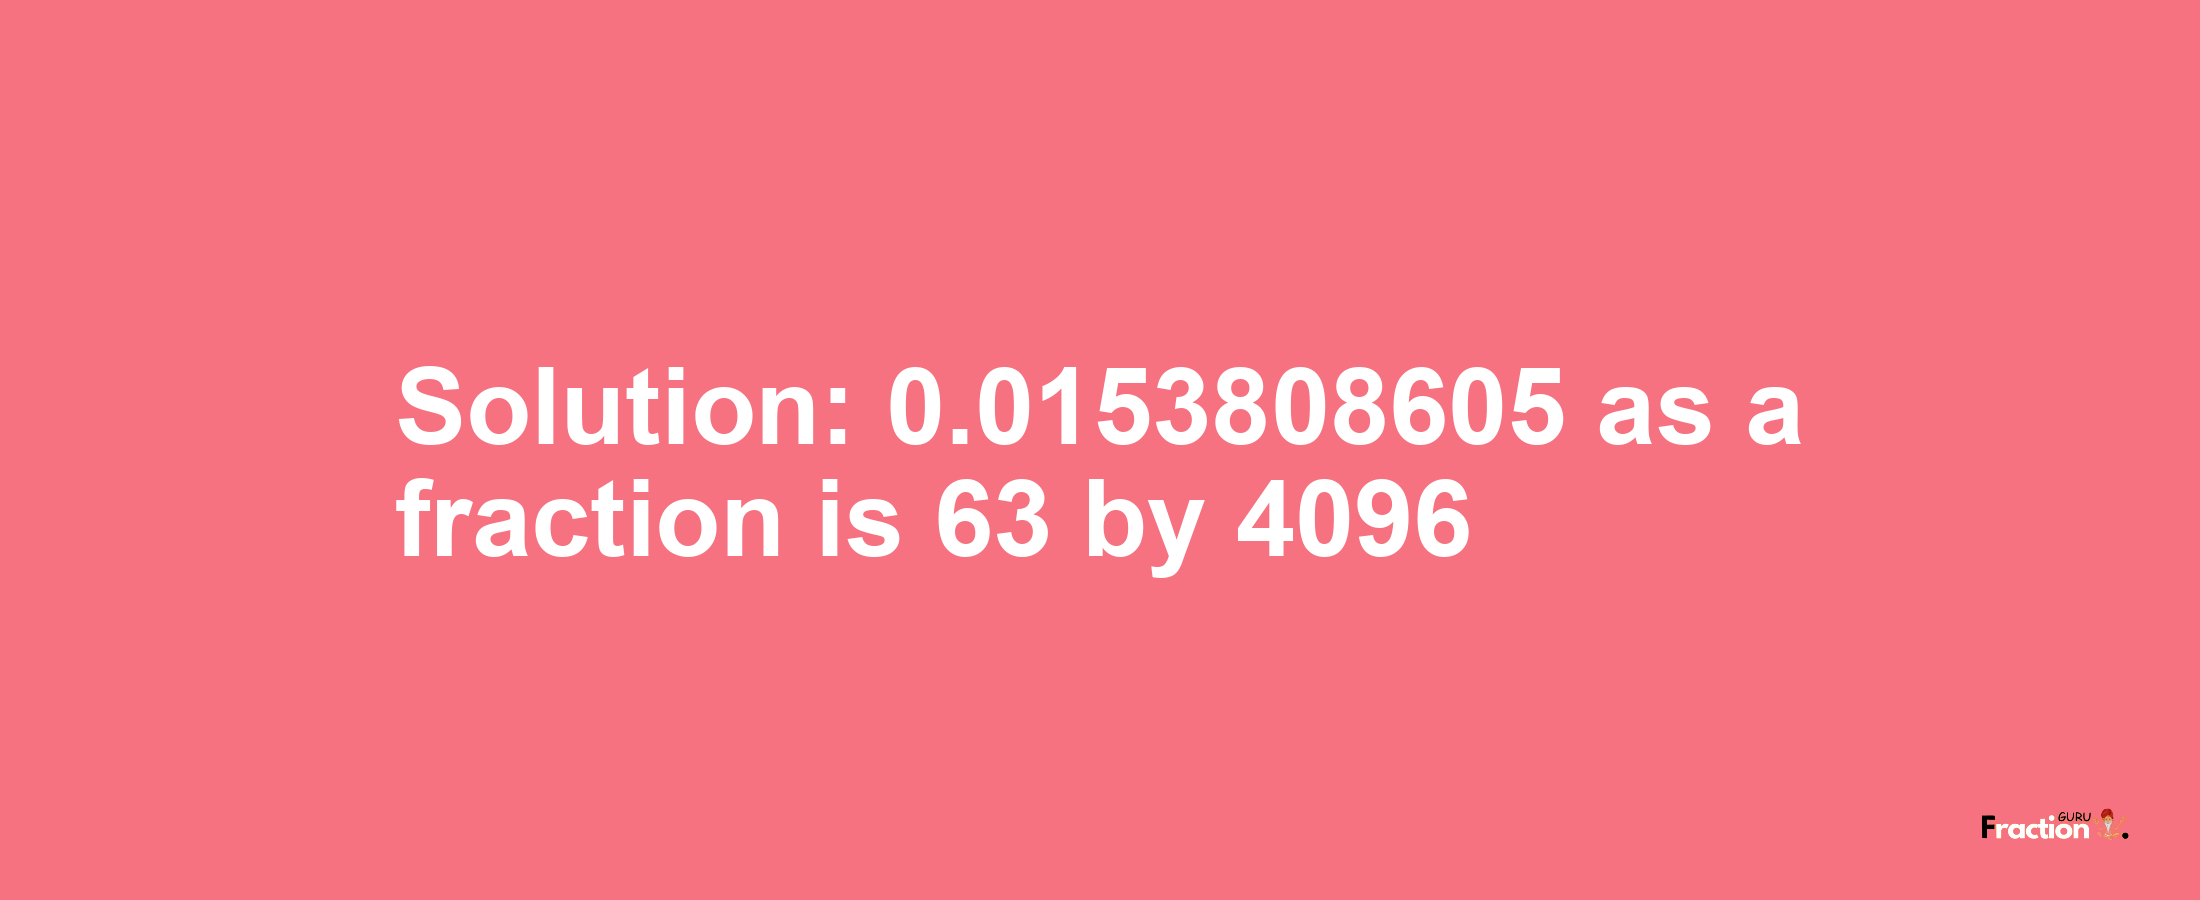 Solution:0.0153808605 as a fraction is 63/4096